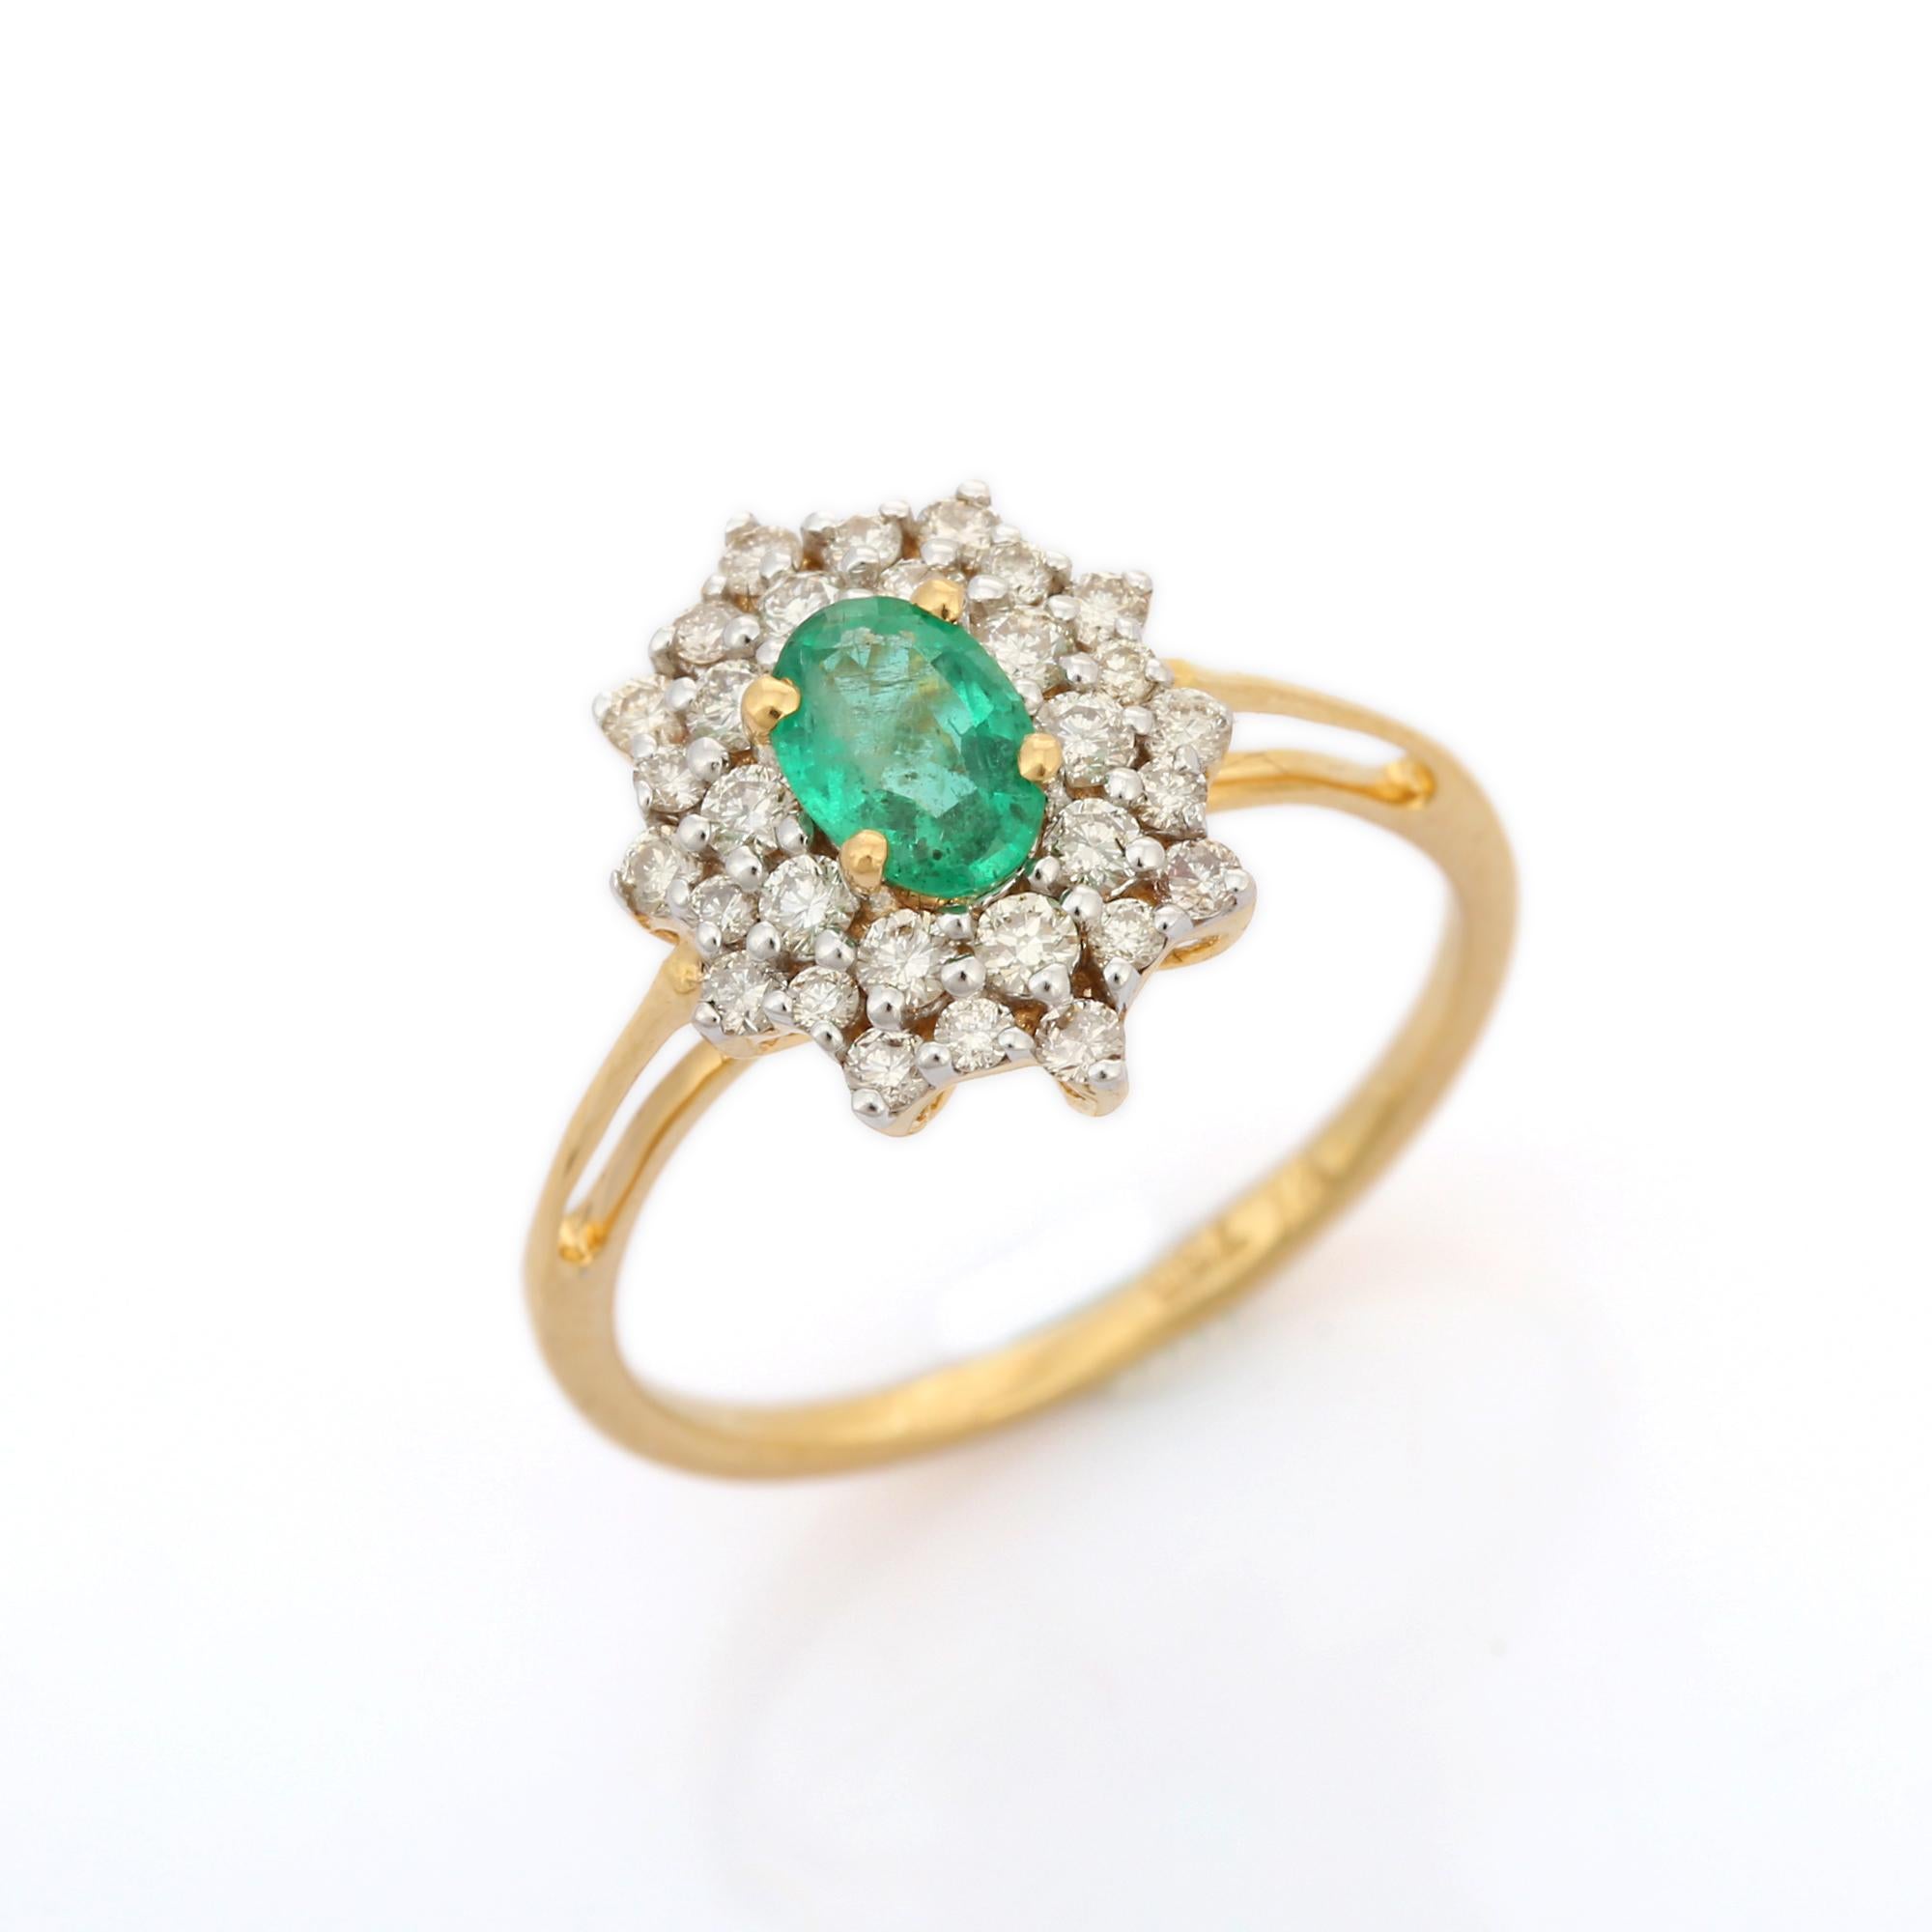 For Sale:  Oval Cut Brilliant Halo Diamond Emerald Wedding Ring in 18K Solid Yellow Gold 5